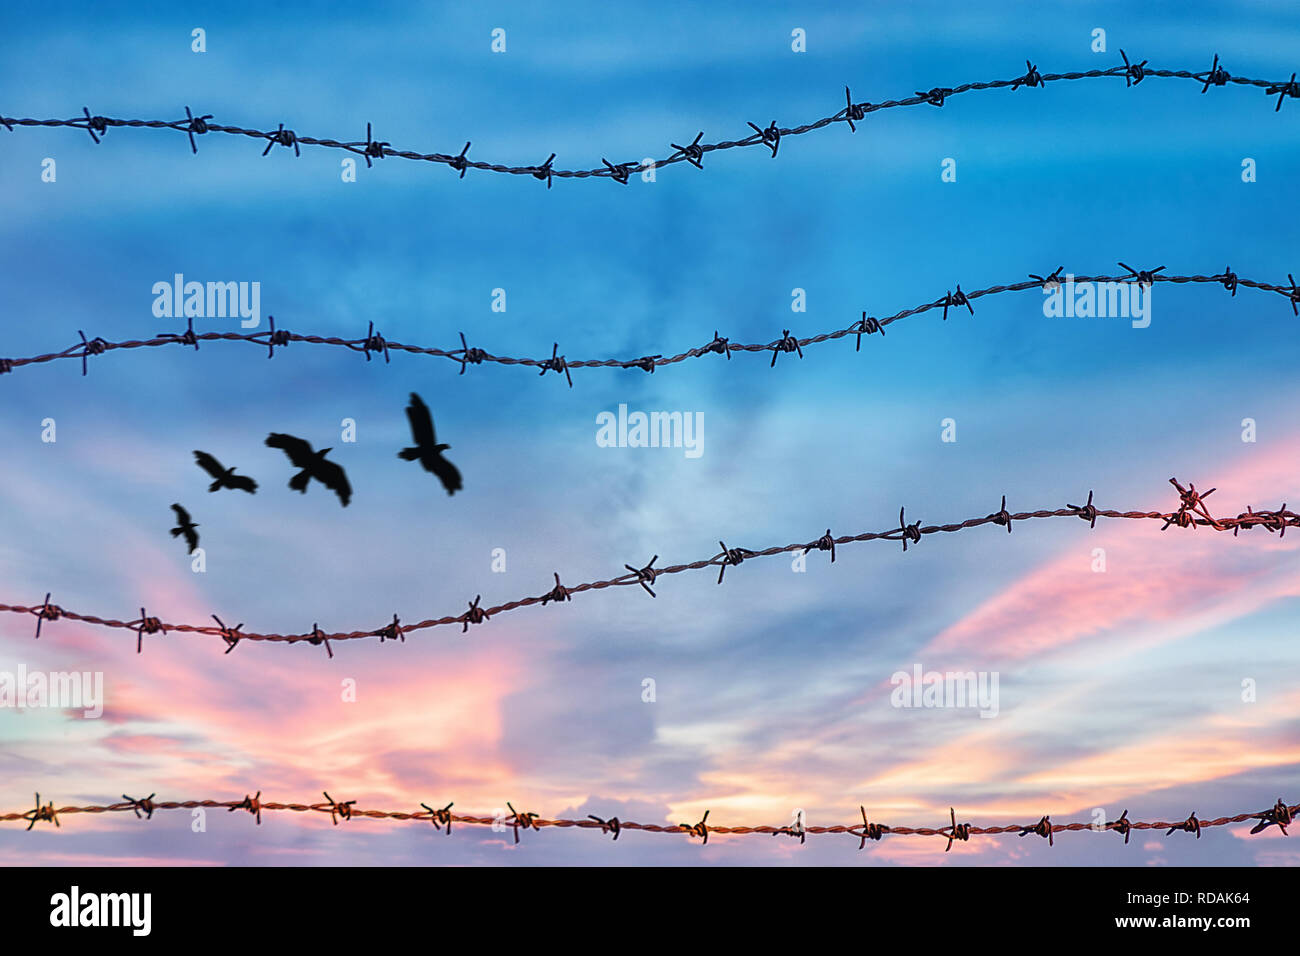 freedom and human rights concept. silhouette of free bird flying in the sky behind barbed wire with sunset background Stock Photo